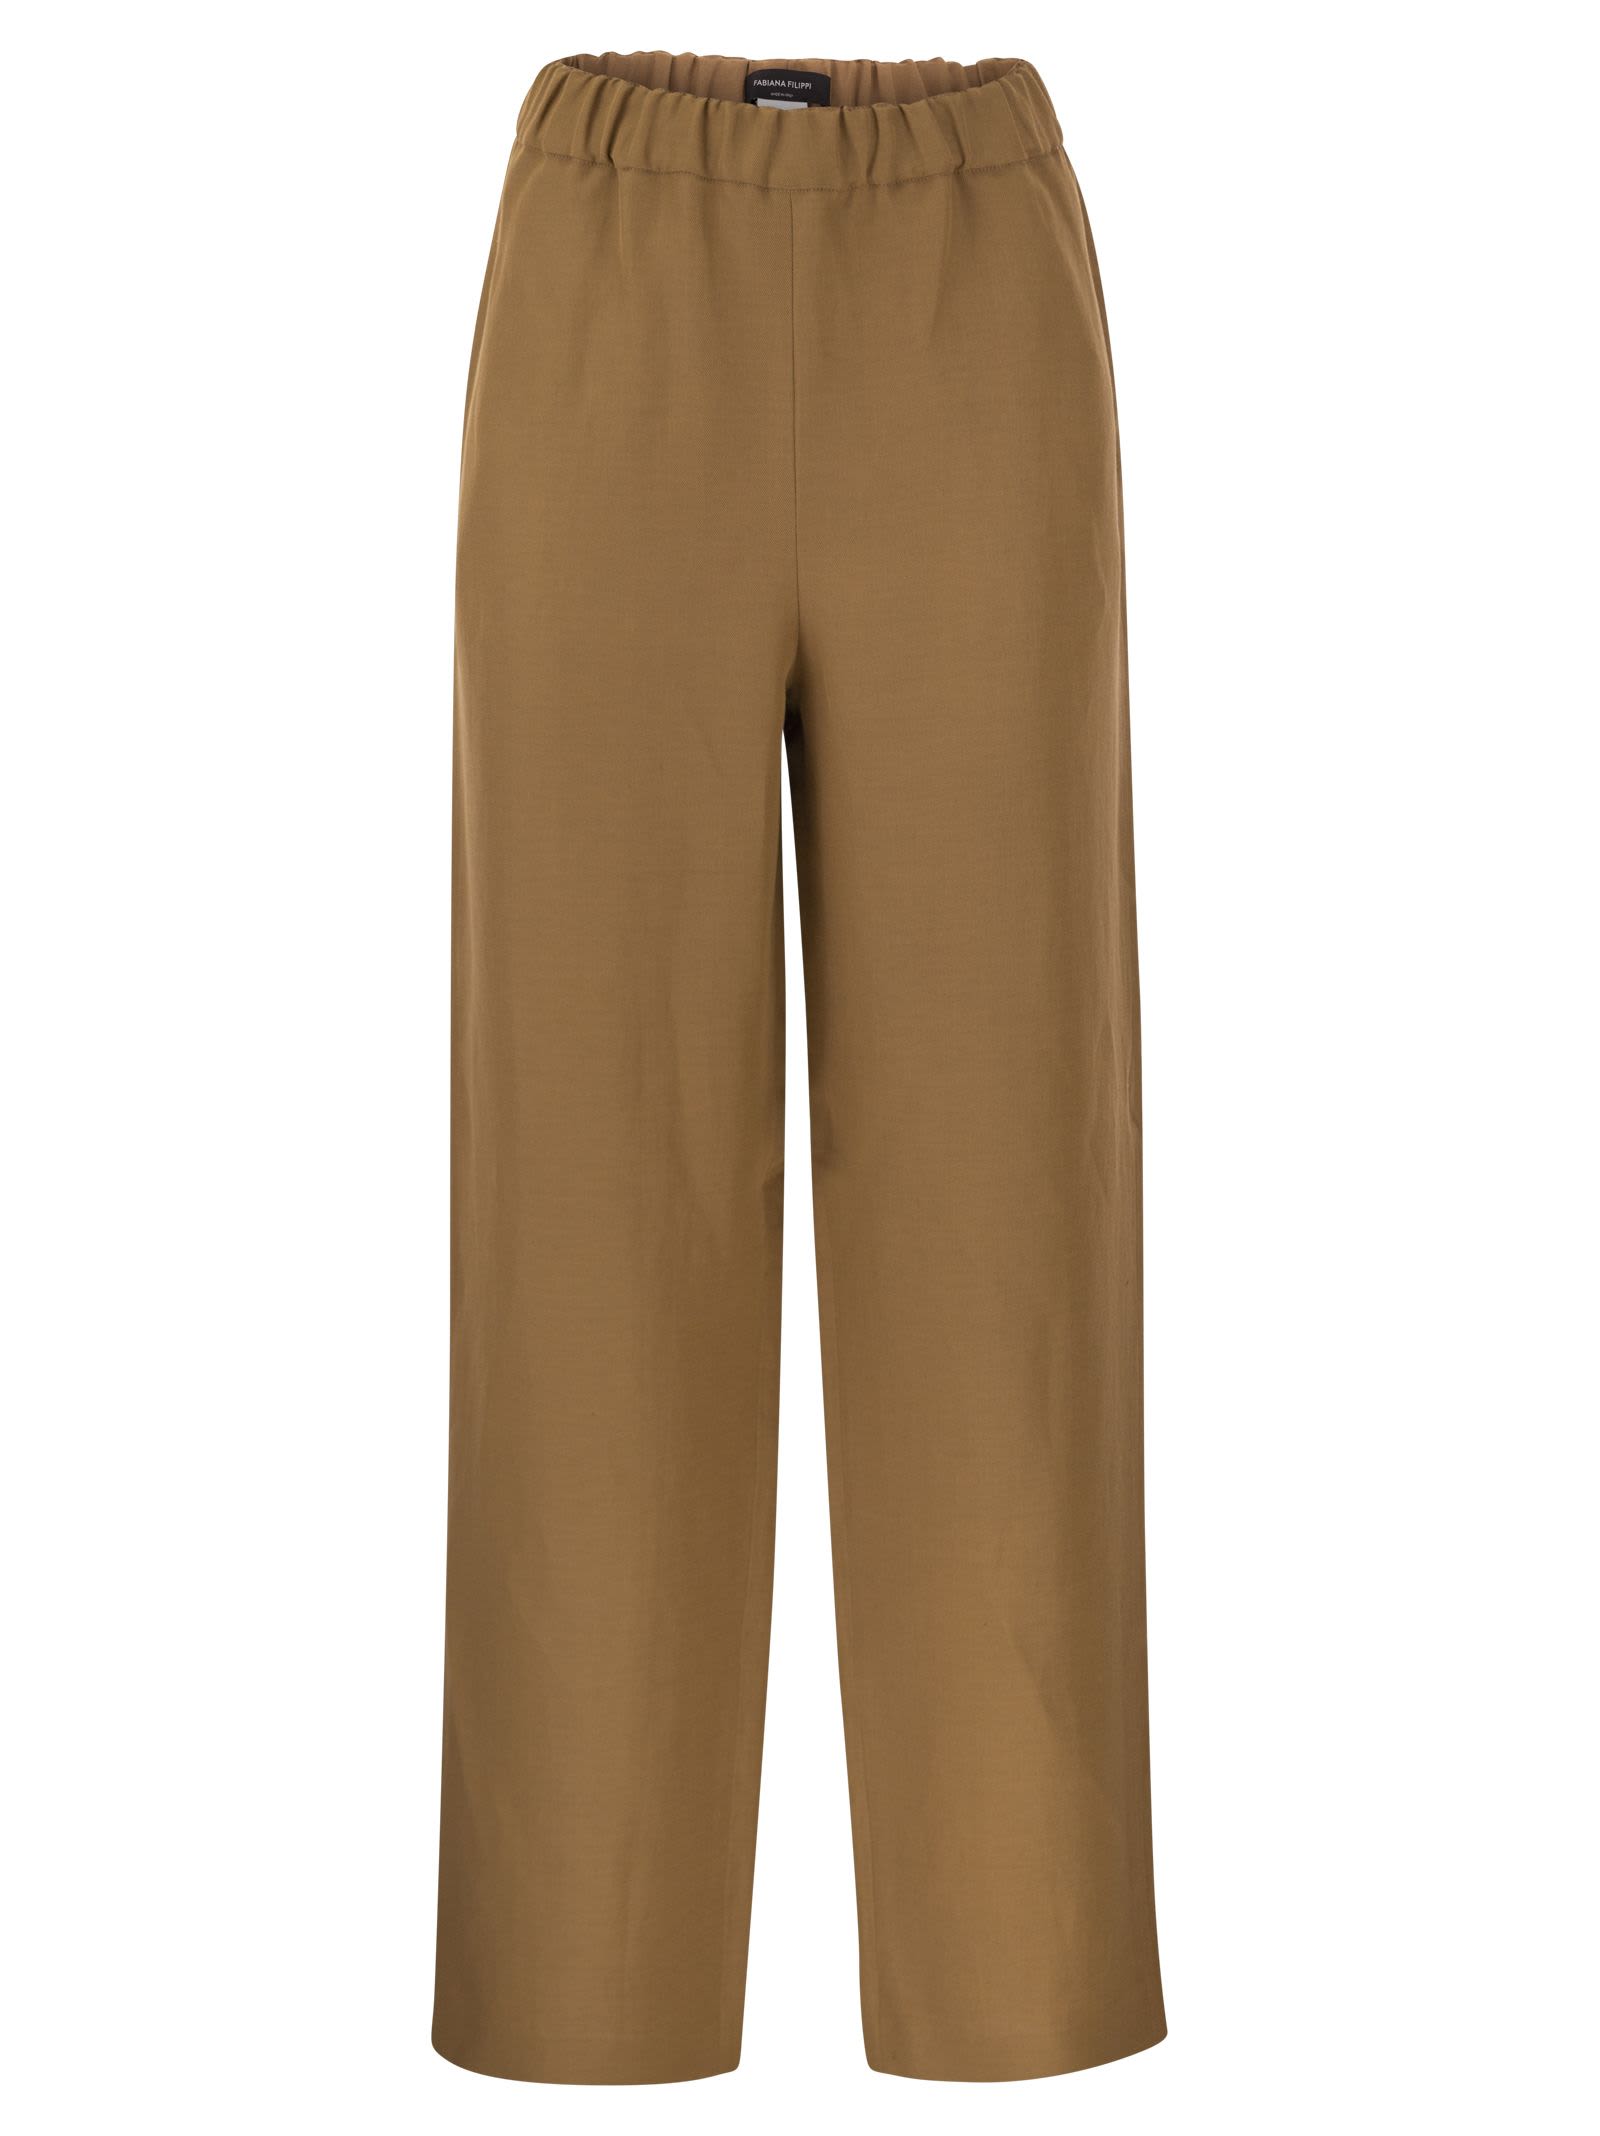 Cognac Brown Twill Weave Trousers